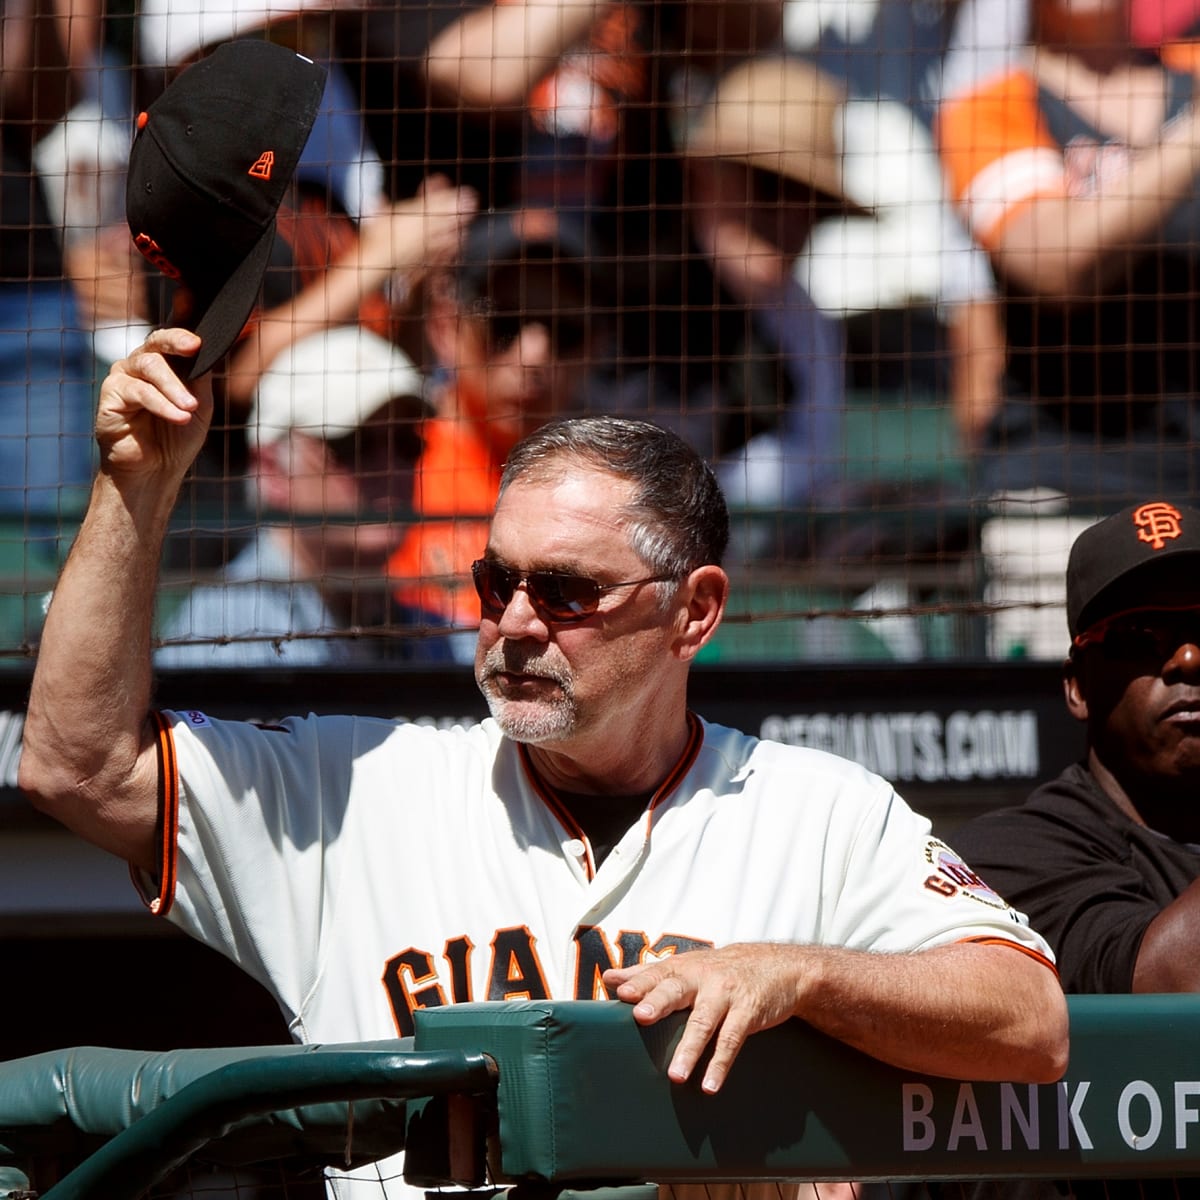 Bruce Bochy returning to Giants' ballpark and what is likely to be a loving  reception - ABC News